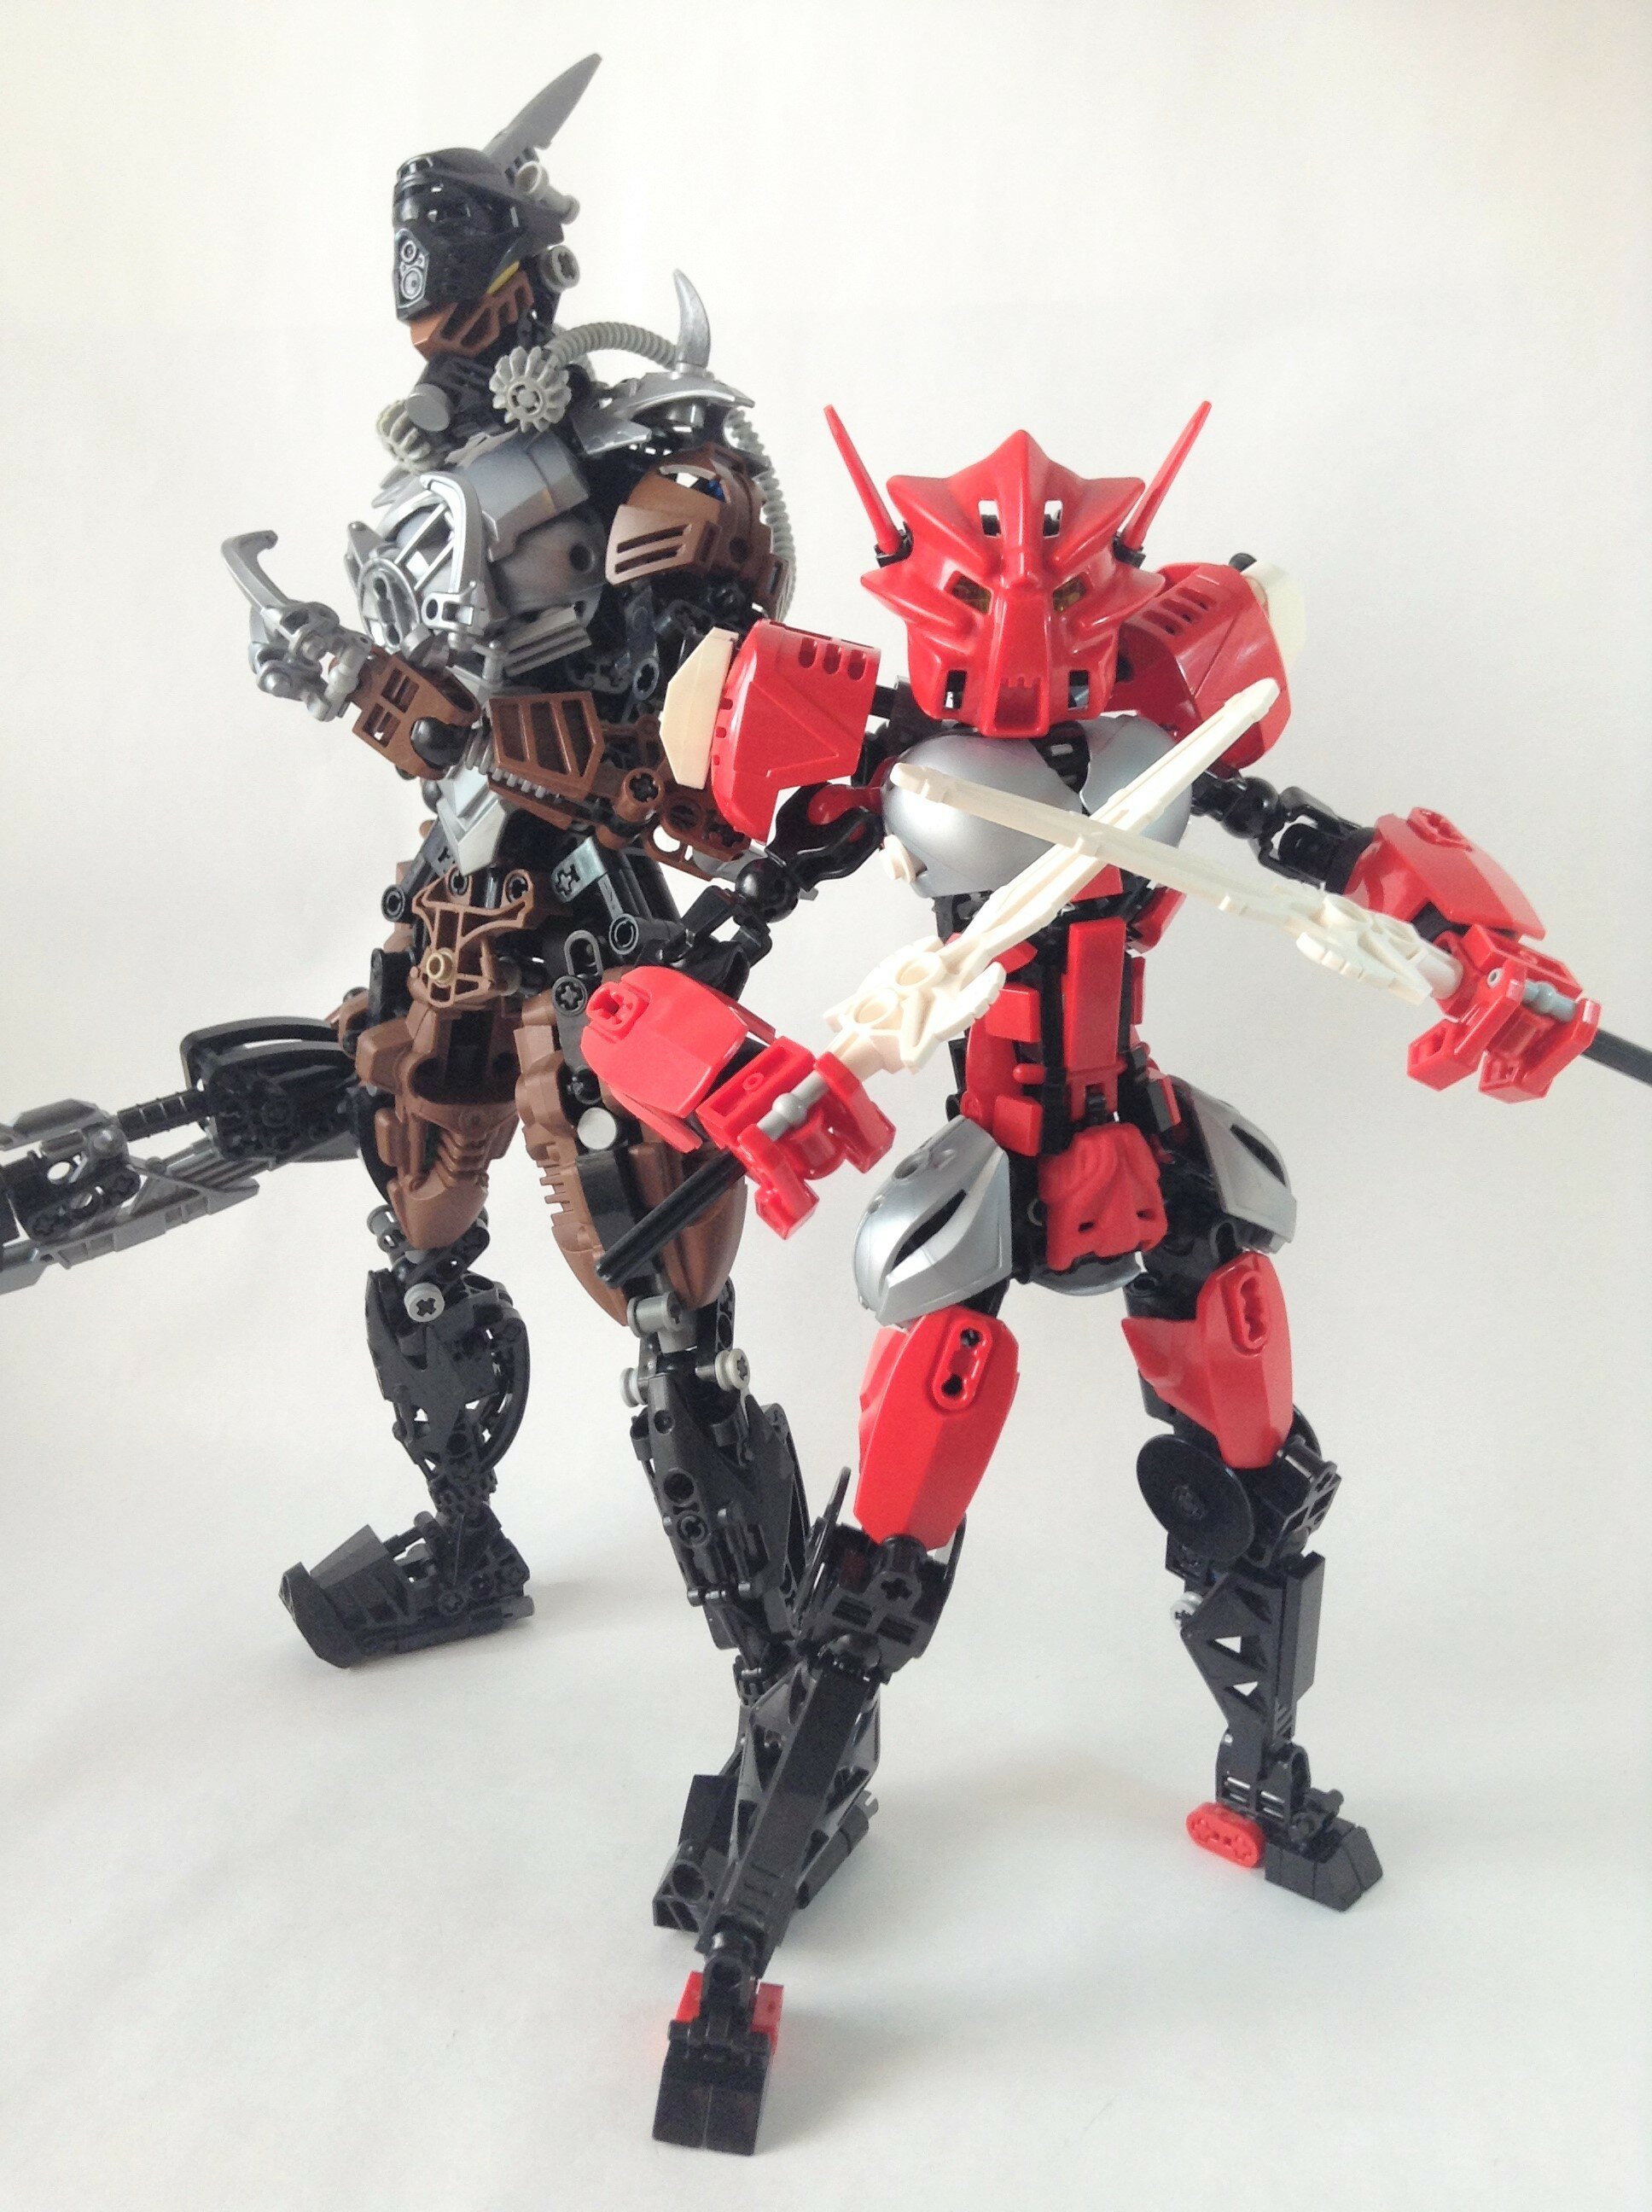 Bionicle female moc - 🧡 The World's Best Photos of catgirl and moc - ...